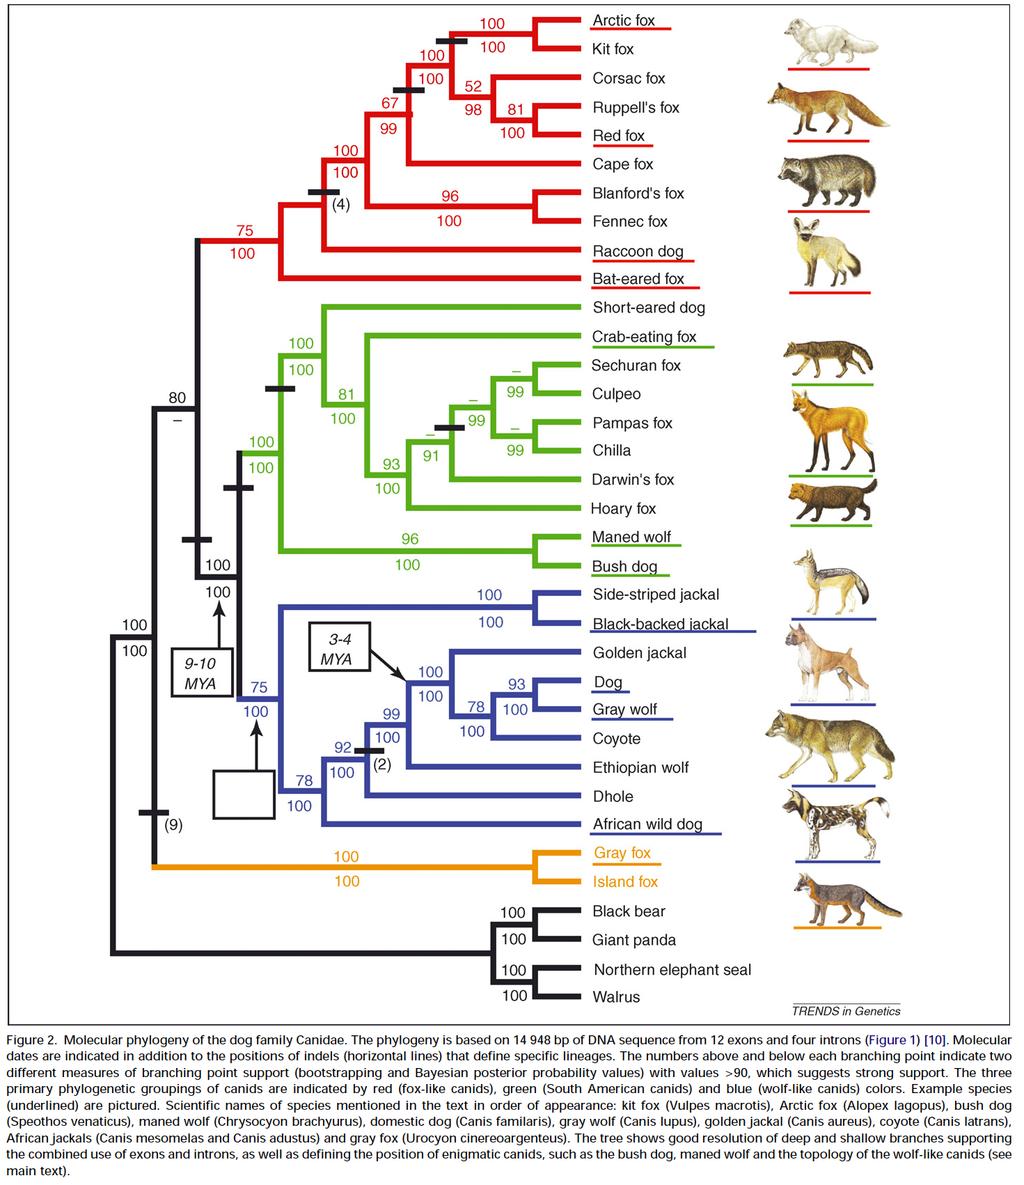 The radiation of the family Canidae occurred about 100 million years ago.